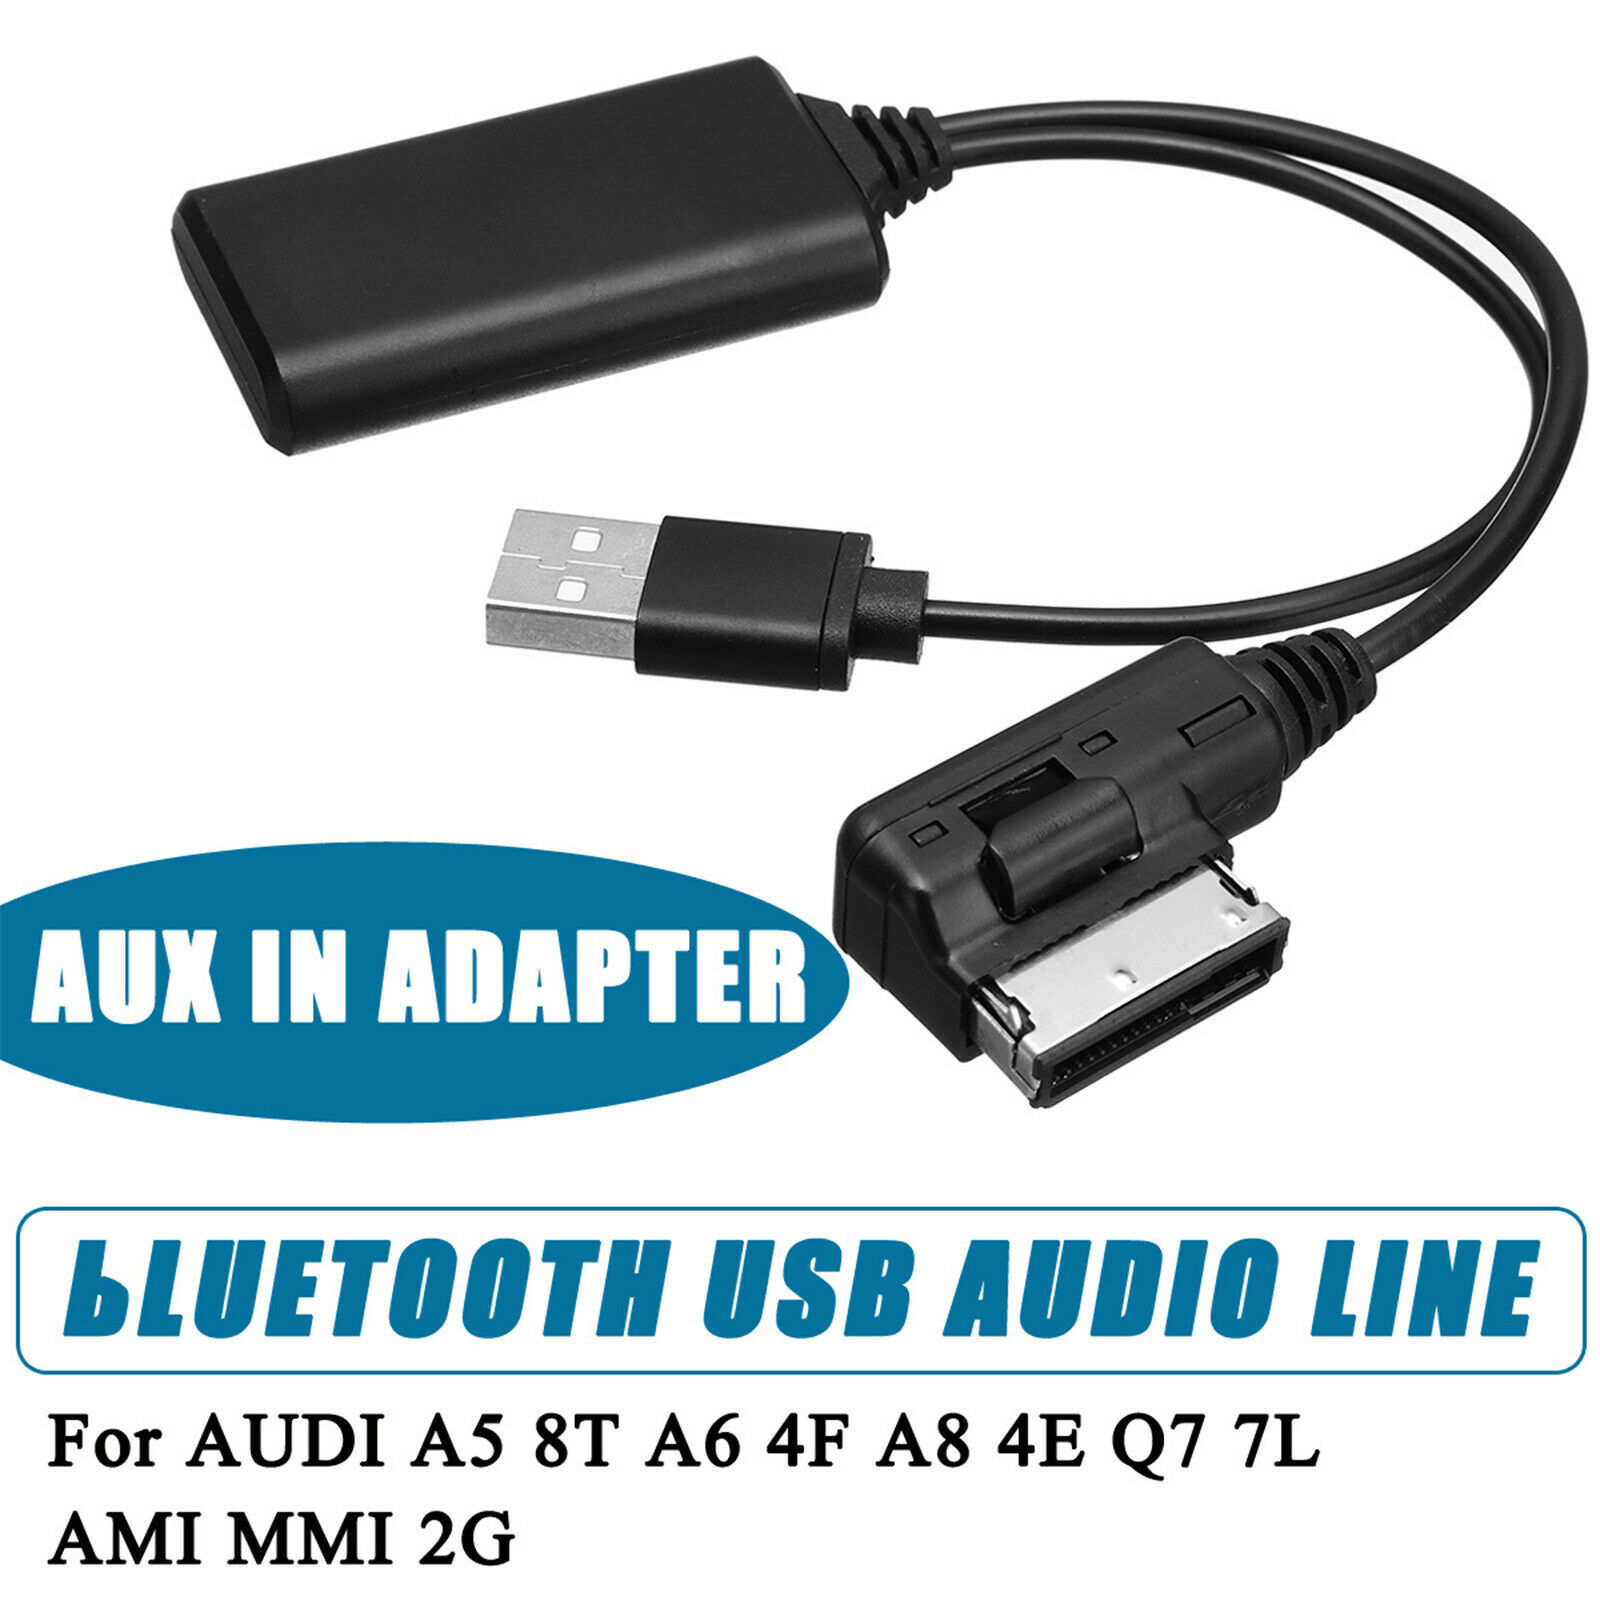 Bluetooth Adapter AUX Music Interface Audio Cable For AUDI VW 2G AMI MMI System